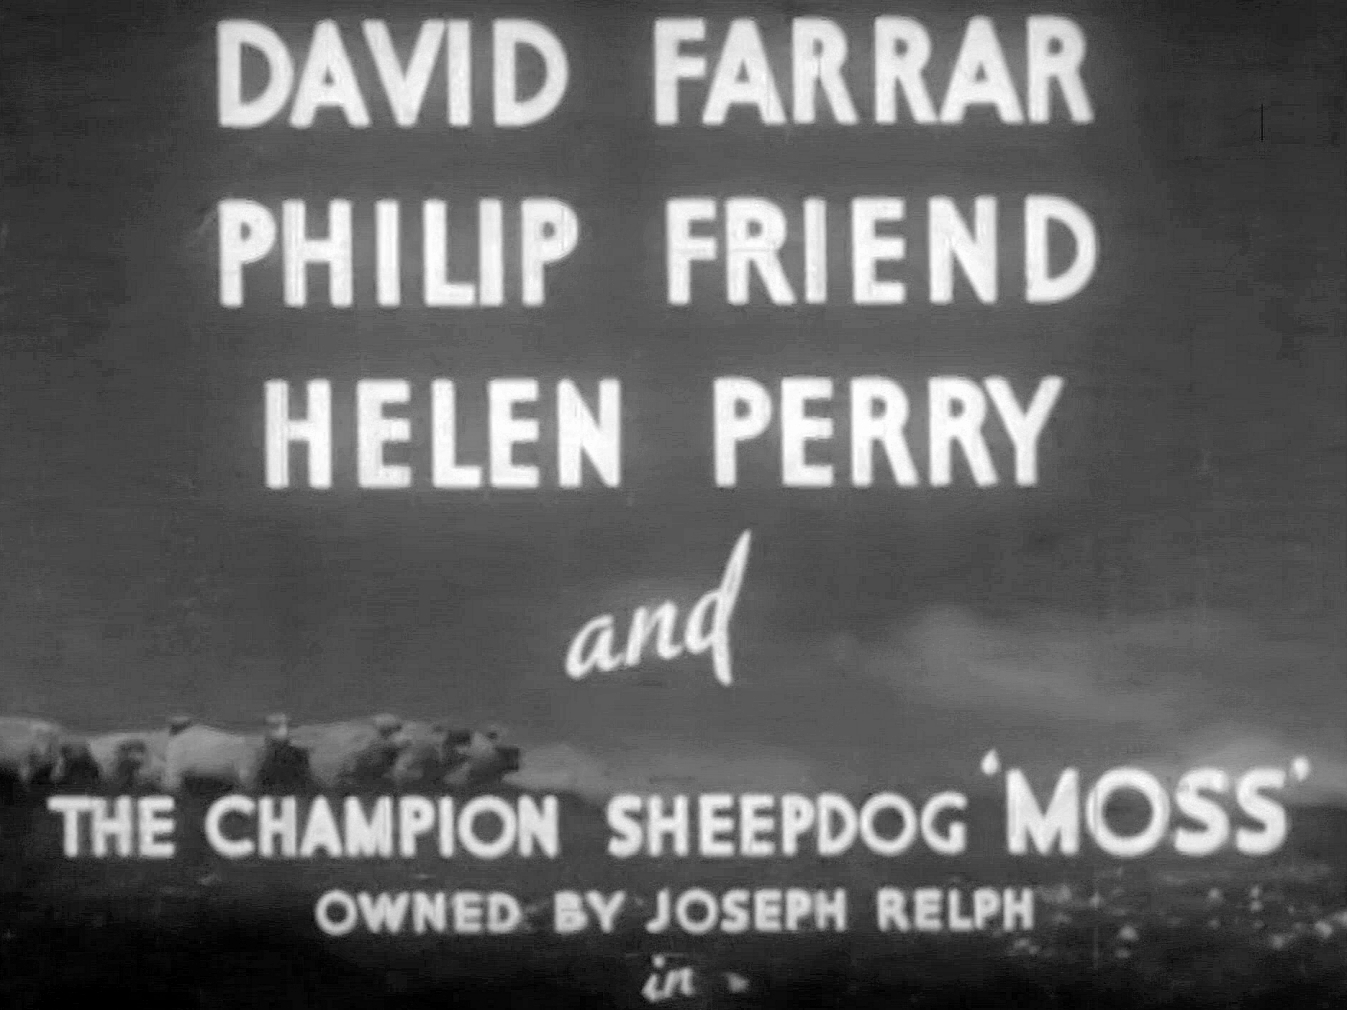 Main title from Sheepdog of the Hills (1941) (2). David Farrar, Philip Friend, Helen Perry and the champion sheepdog ‘Moss’ owned by Joseph Relph in